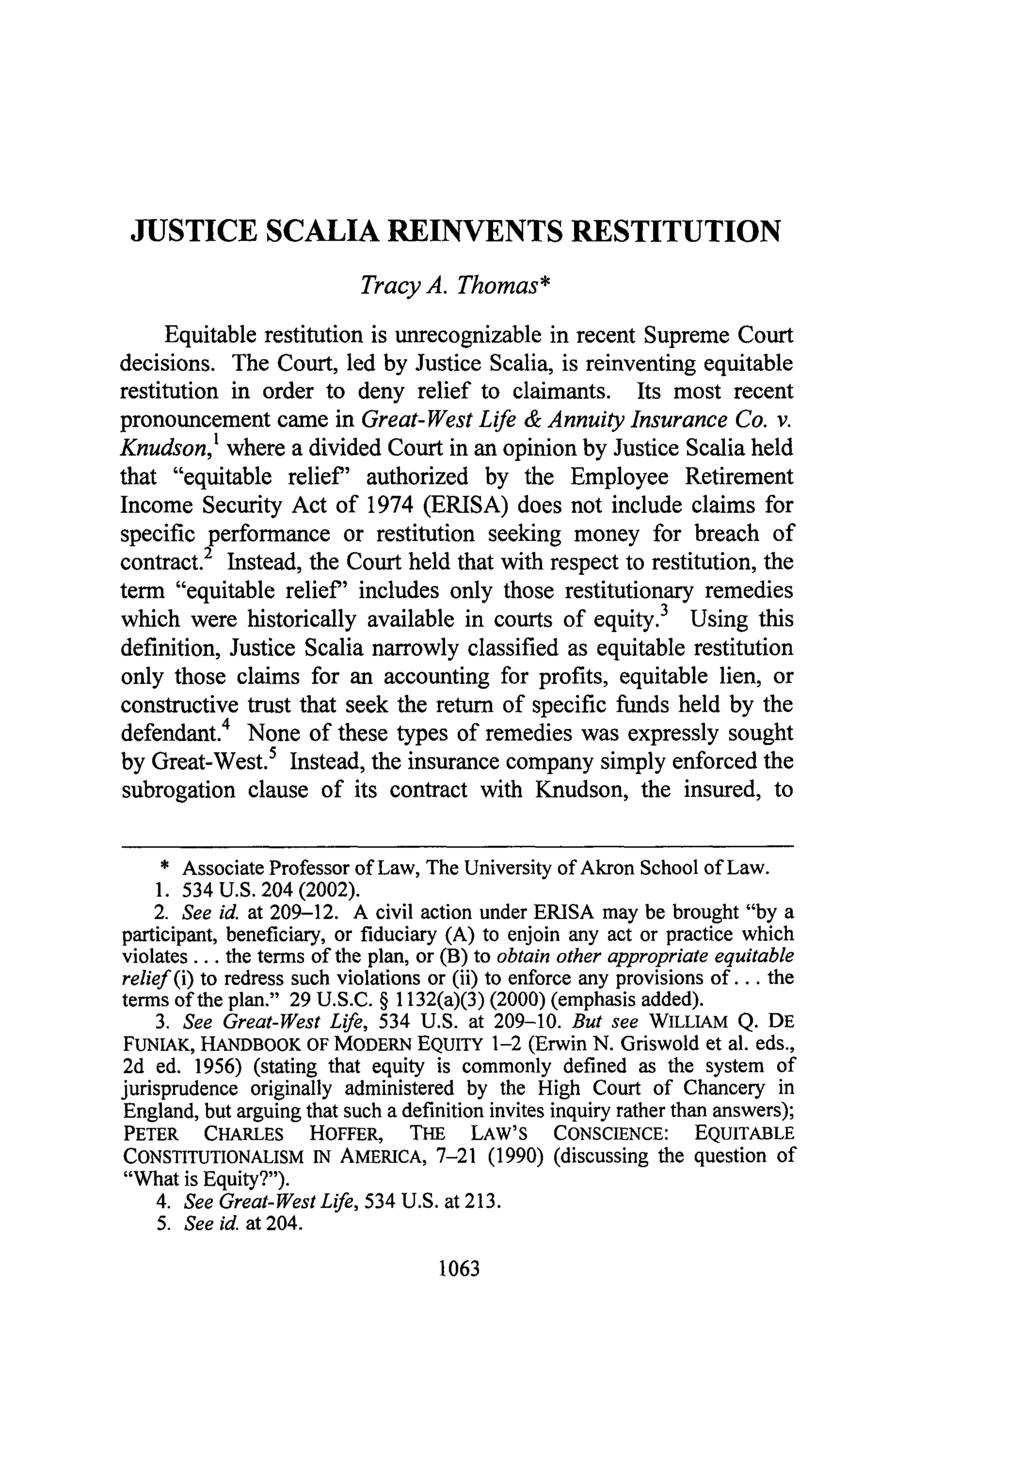 JUSTICE SCALIA REINVENTS RESTITUTION Tracy A. Thomas* Equitable restitution is unrecognizable in recent Supreme Court decisions.